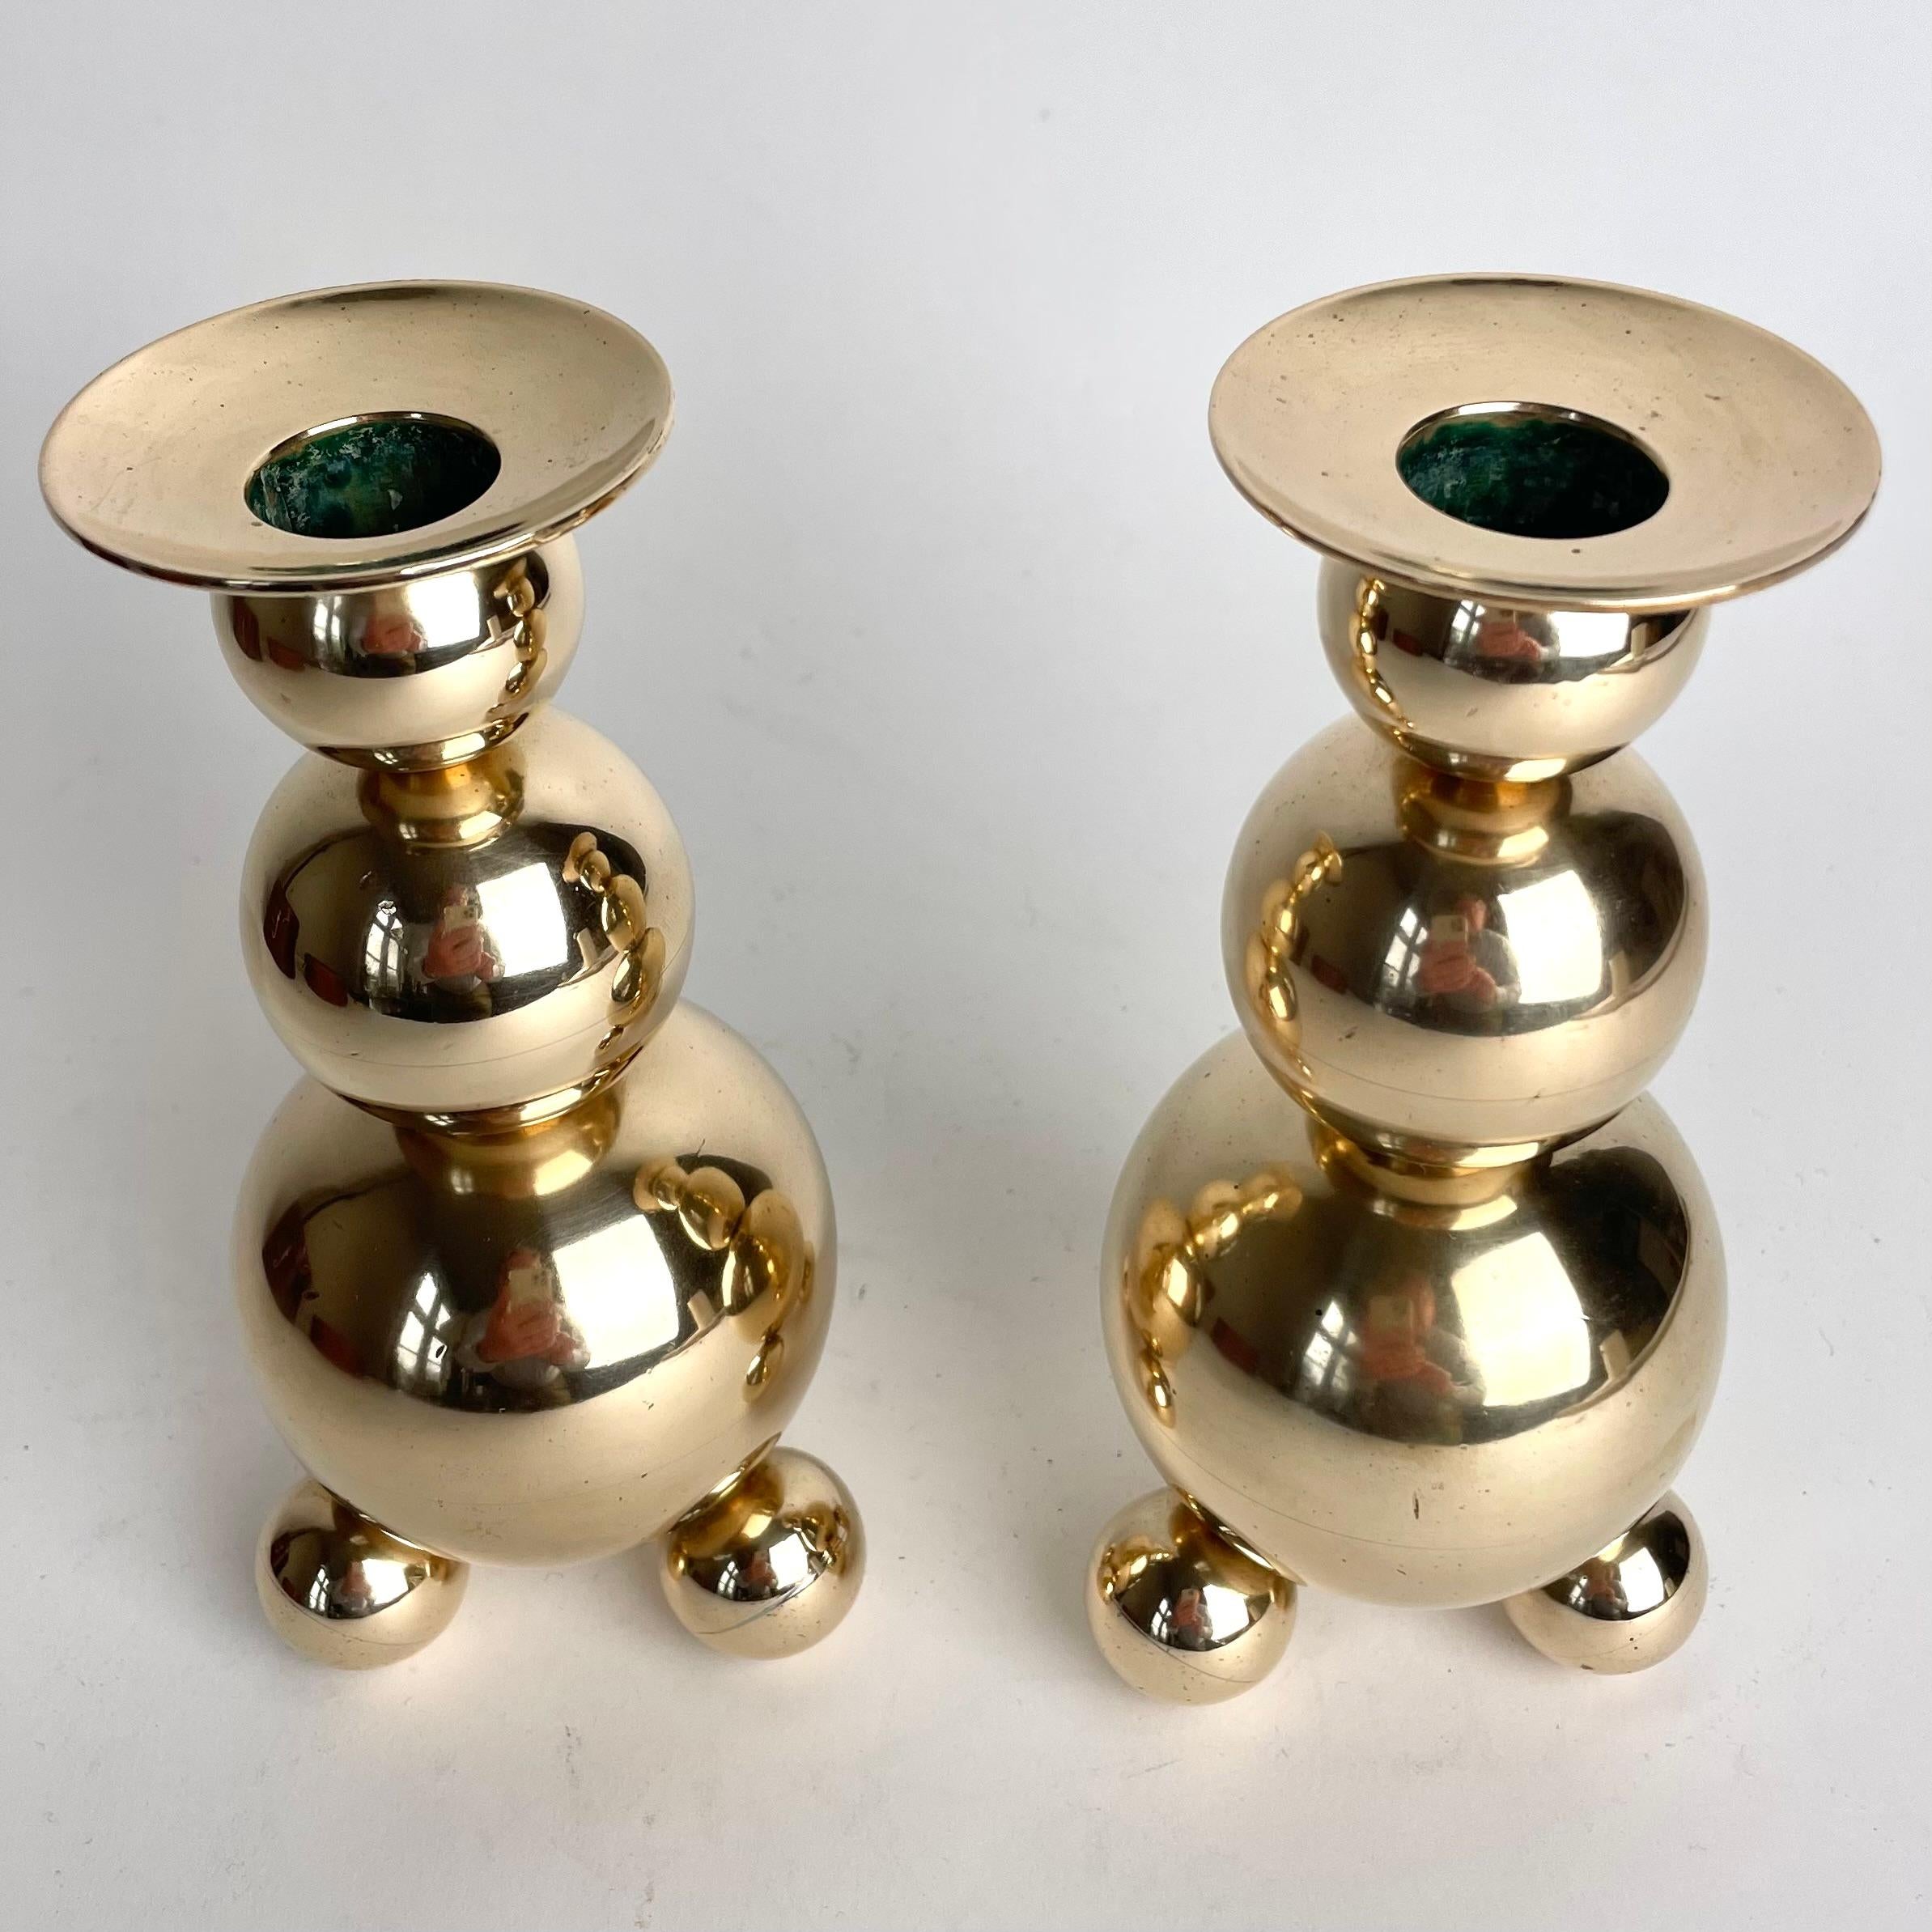 Brass A pair of Candlesticks from Gusums Bruk in Sweden from the early 20th Century